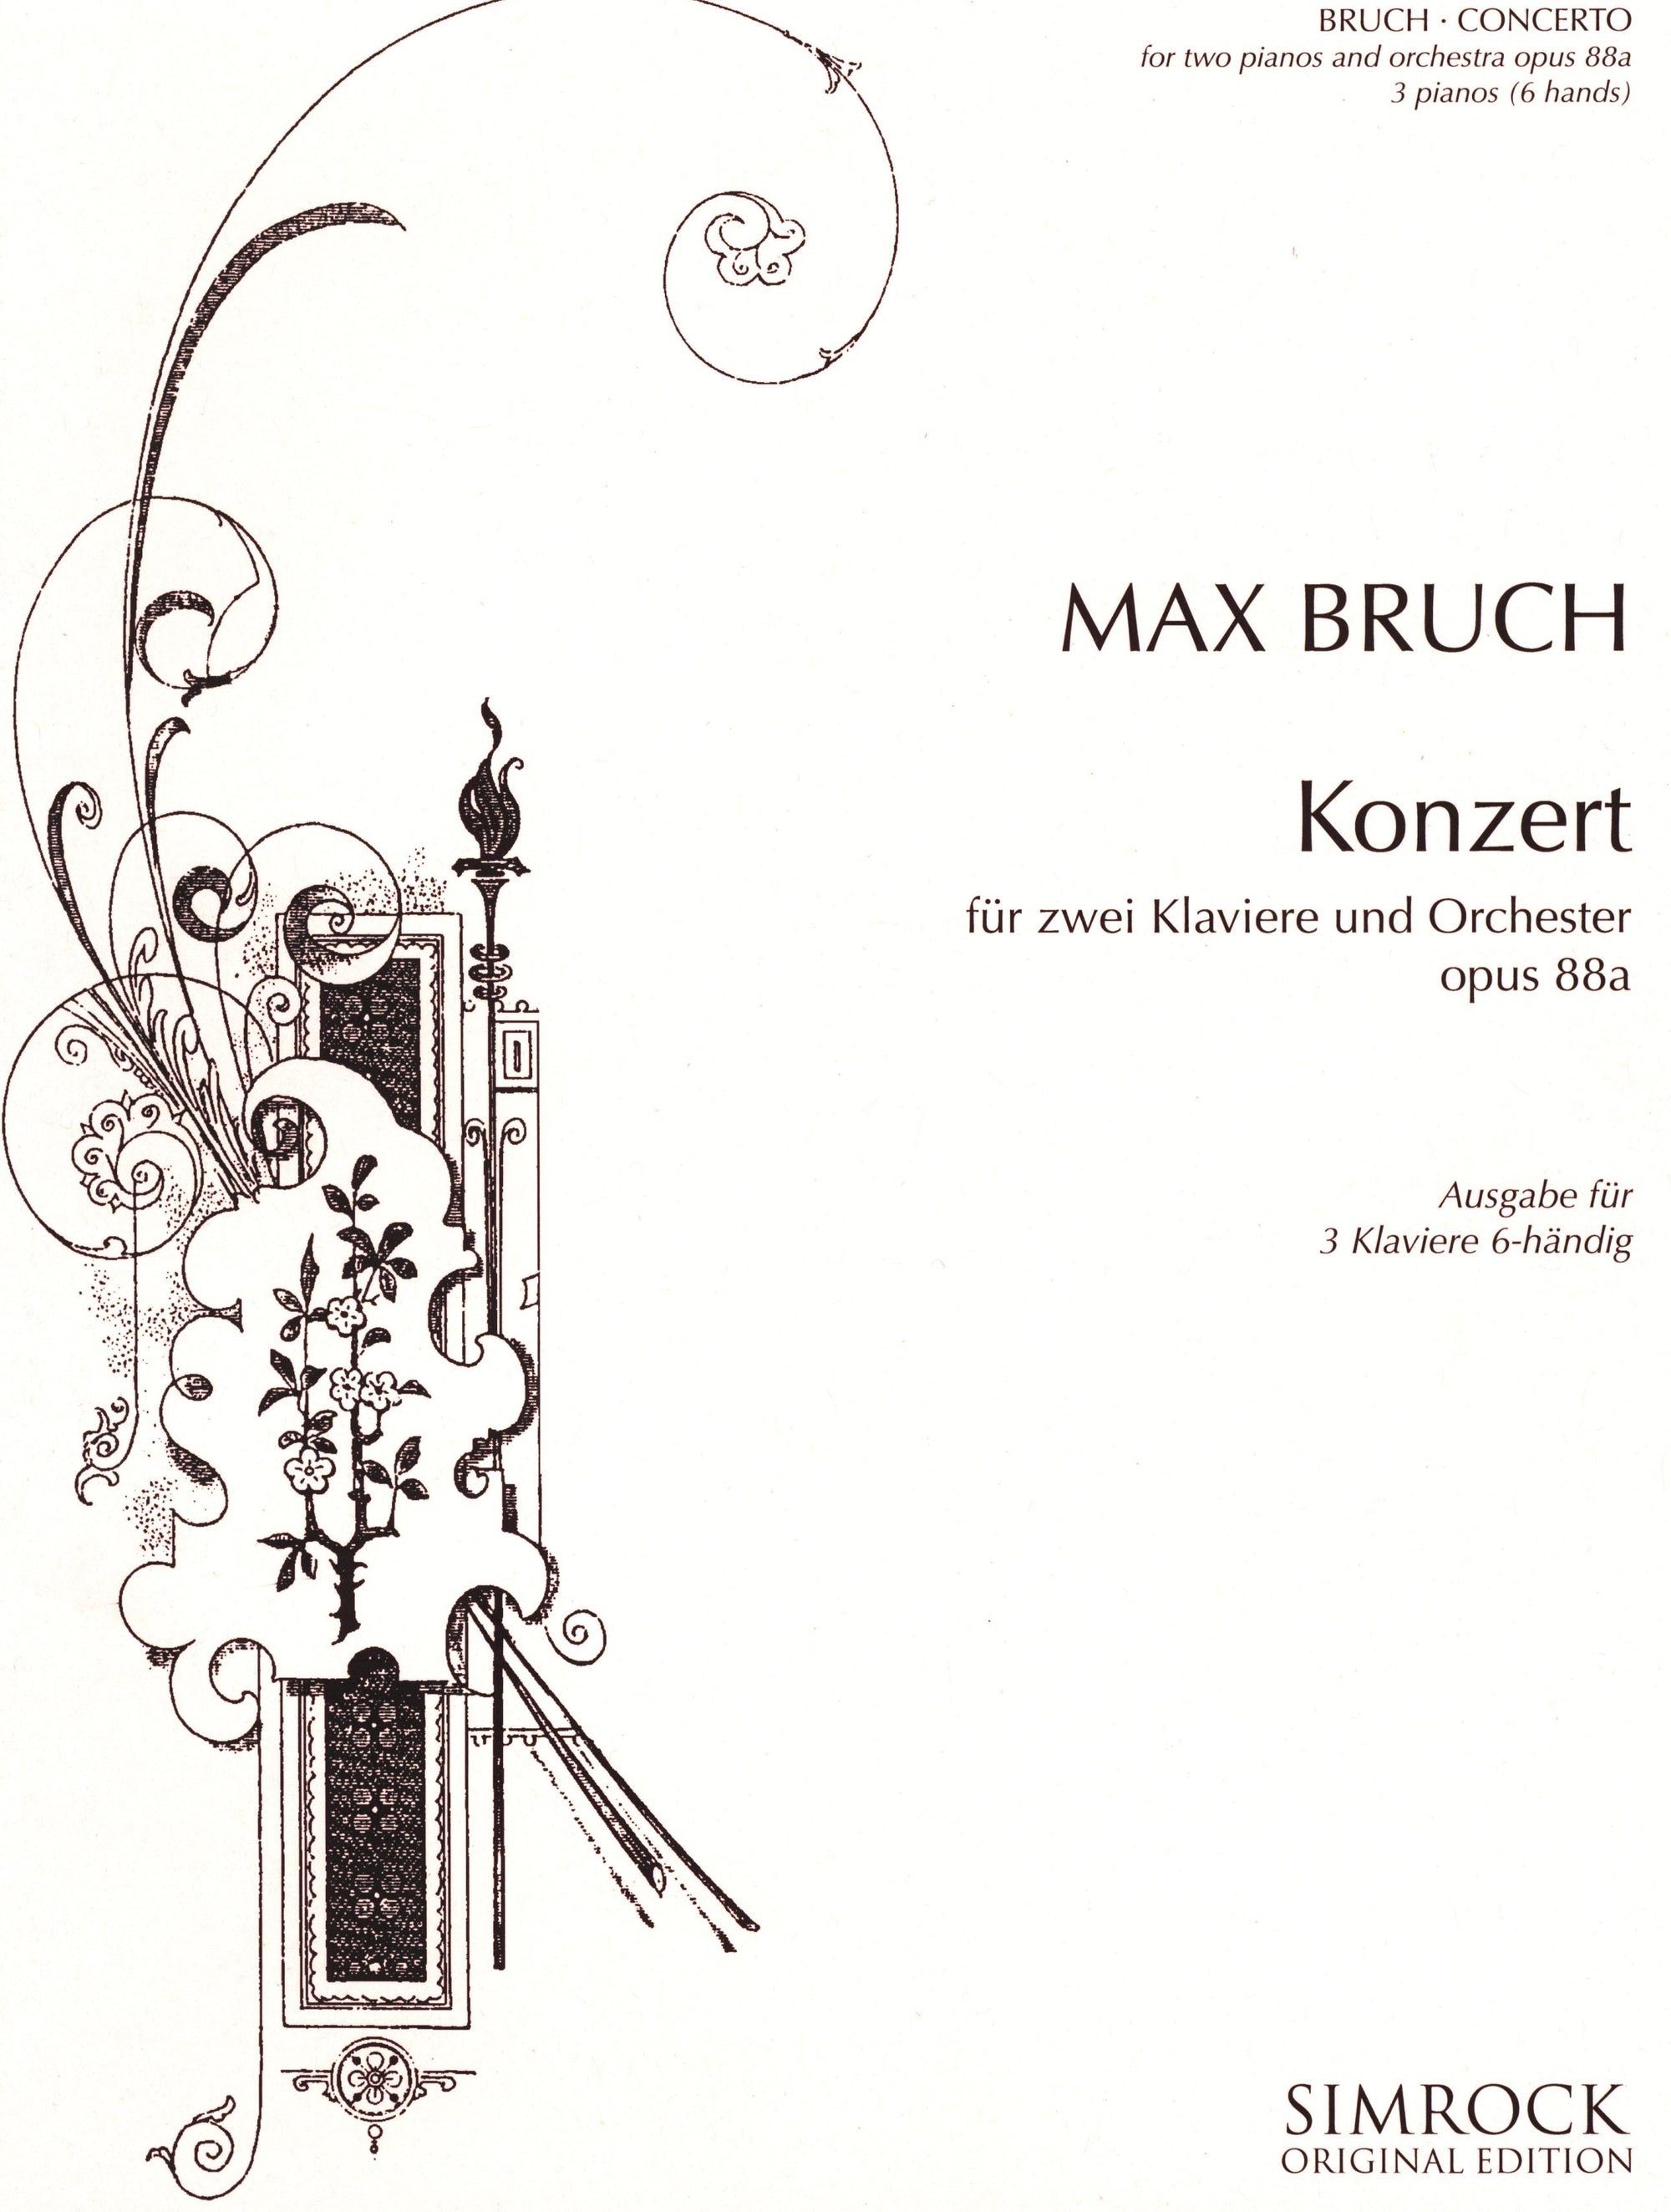 Bruch: Concerto for Two Pianos, Op. 88a